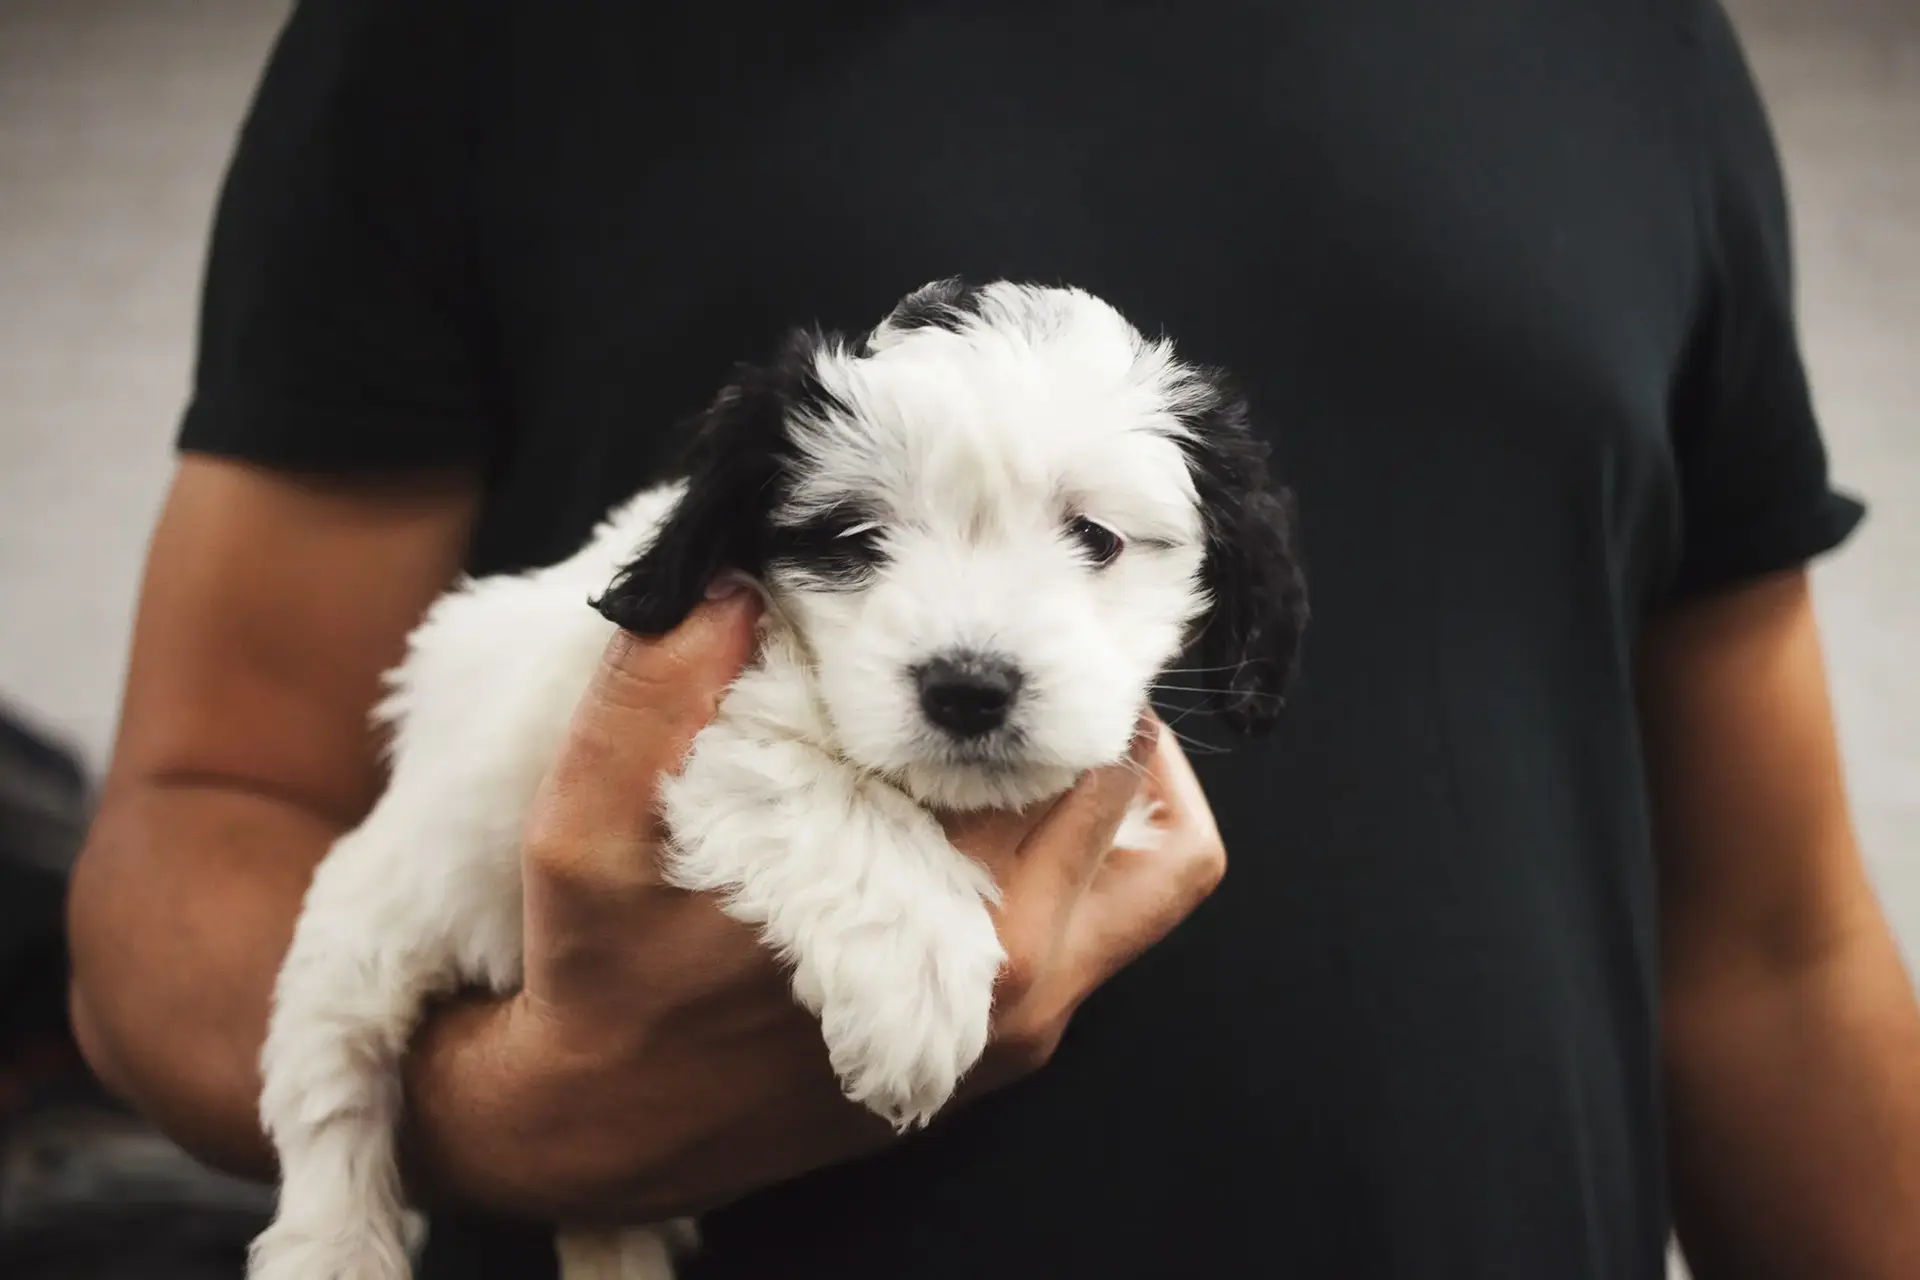 Small puppy with white fur and black spots